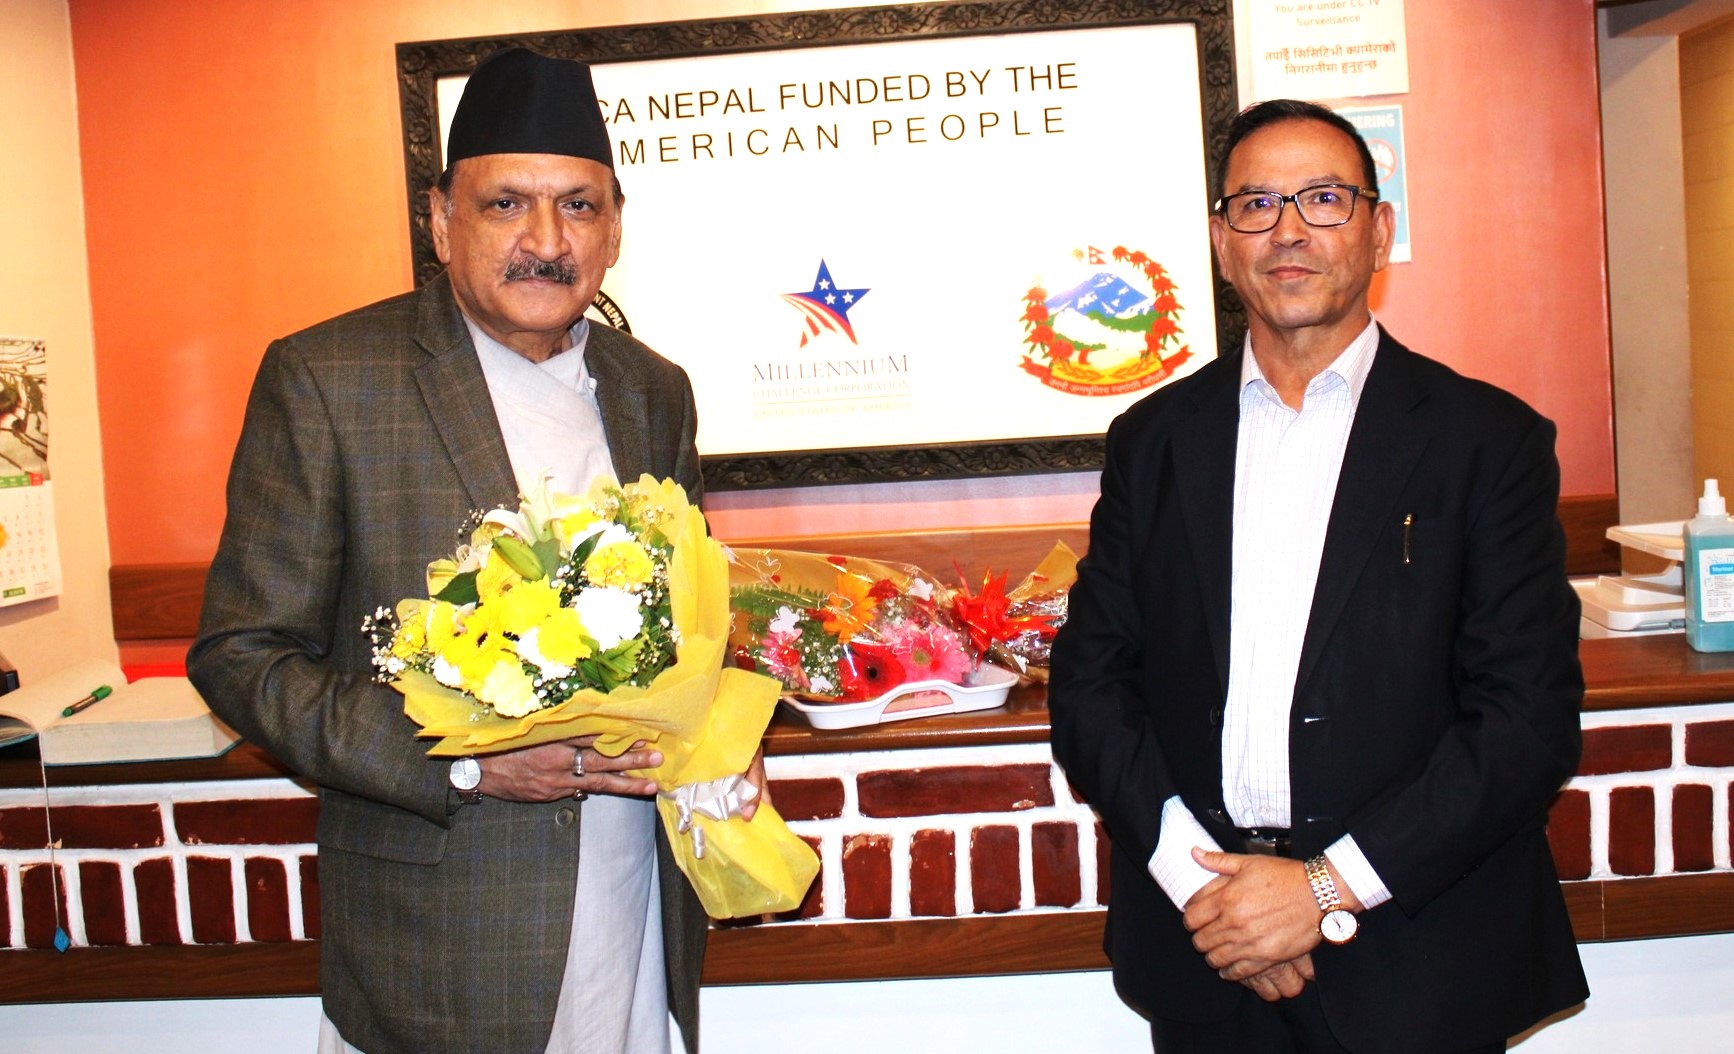 Finance Minister Mahat asserts No further contributions to MCC projects amidst escalating costs